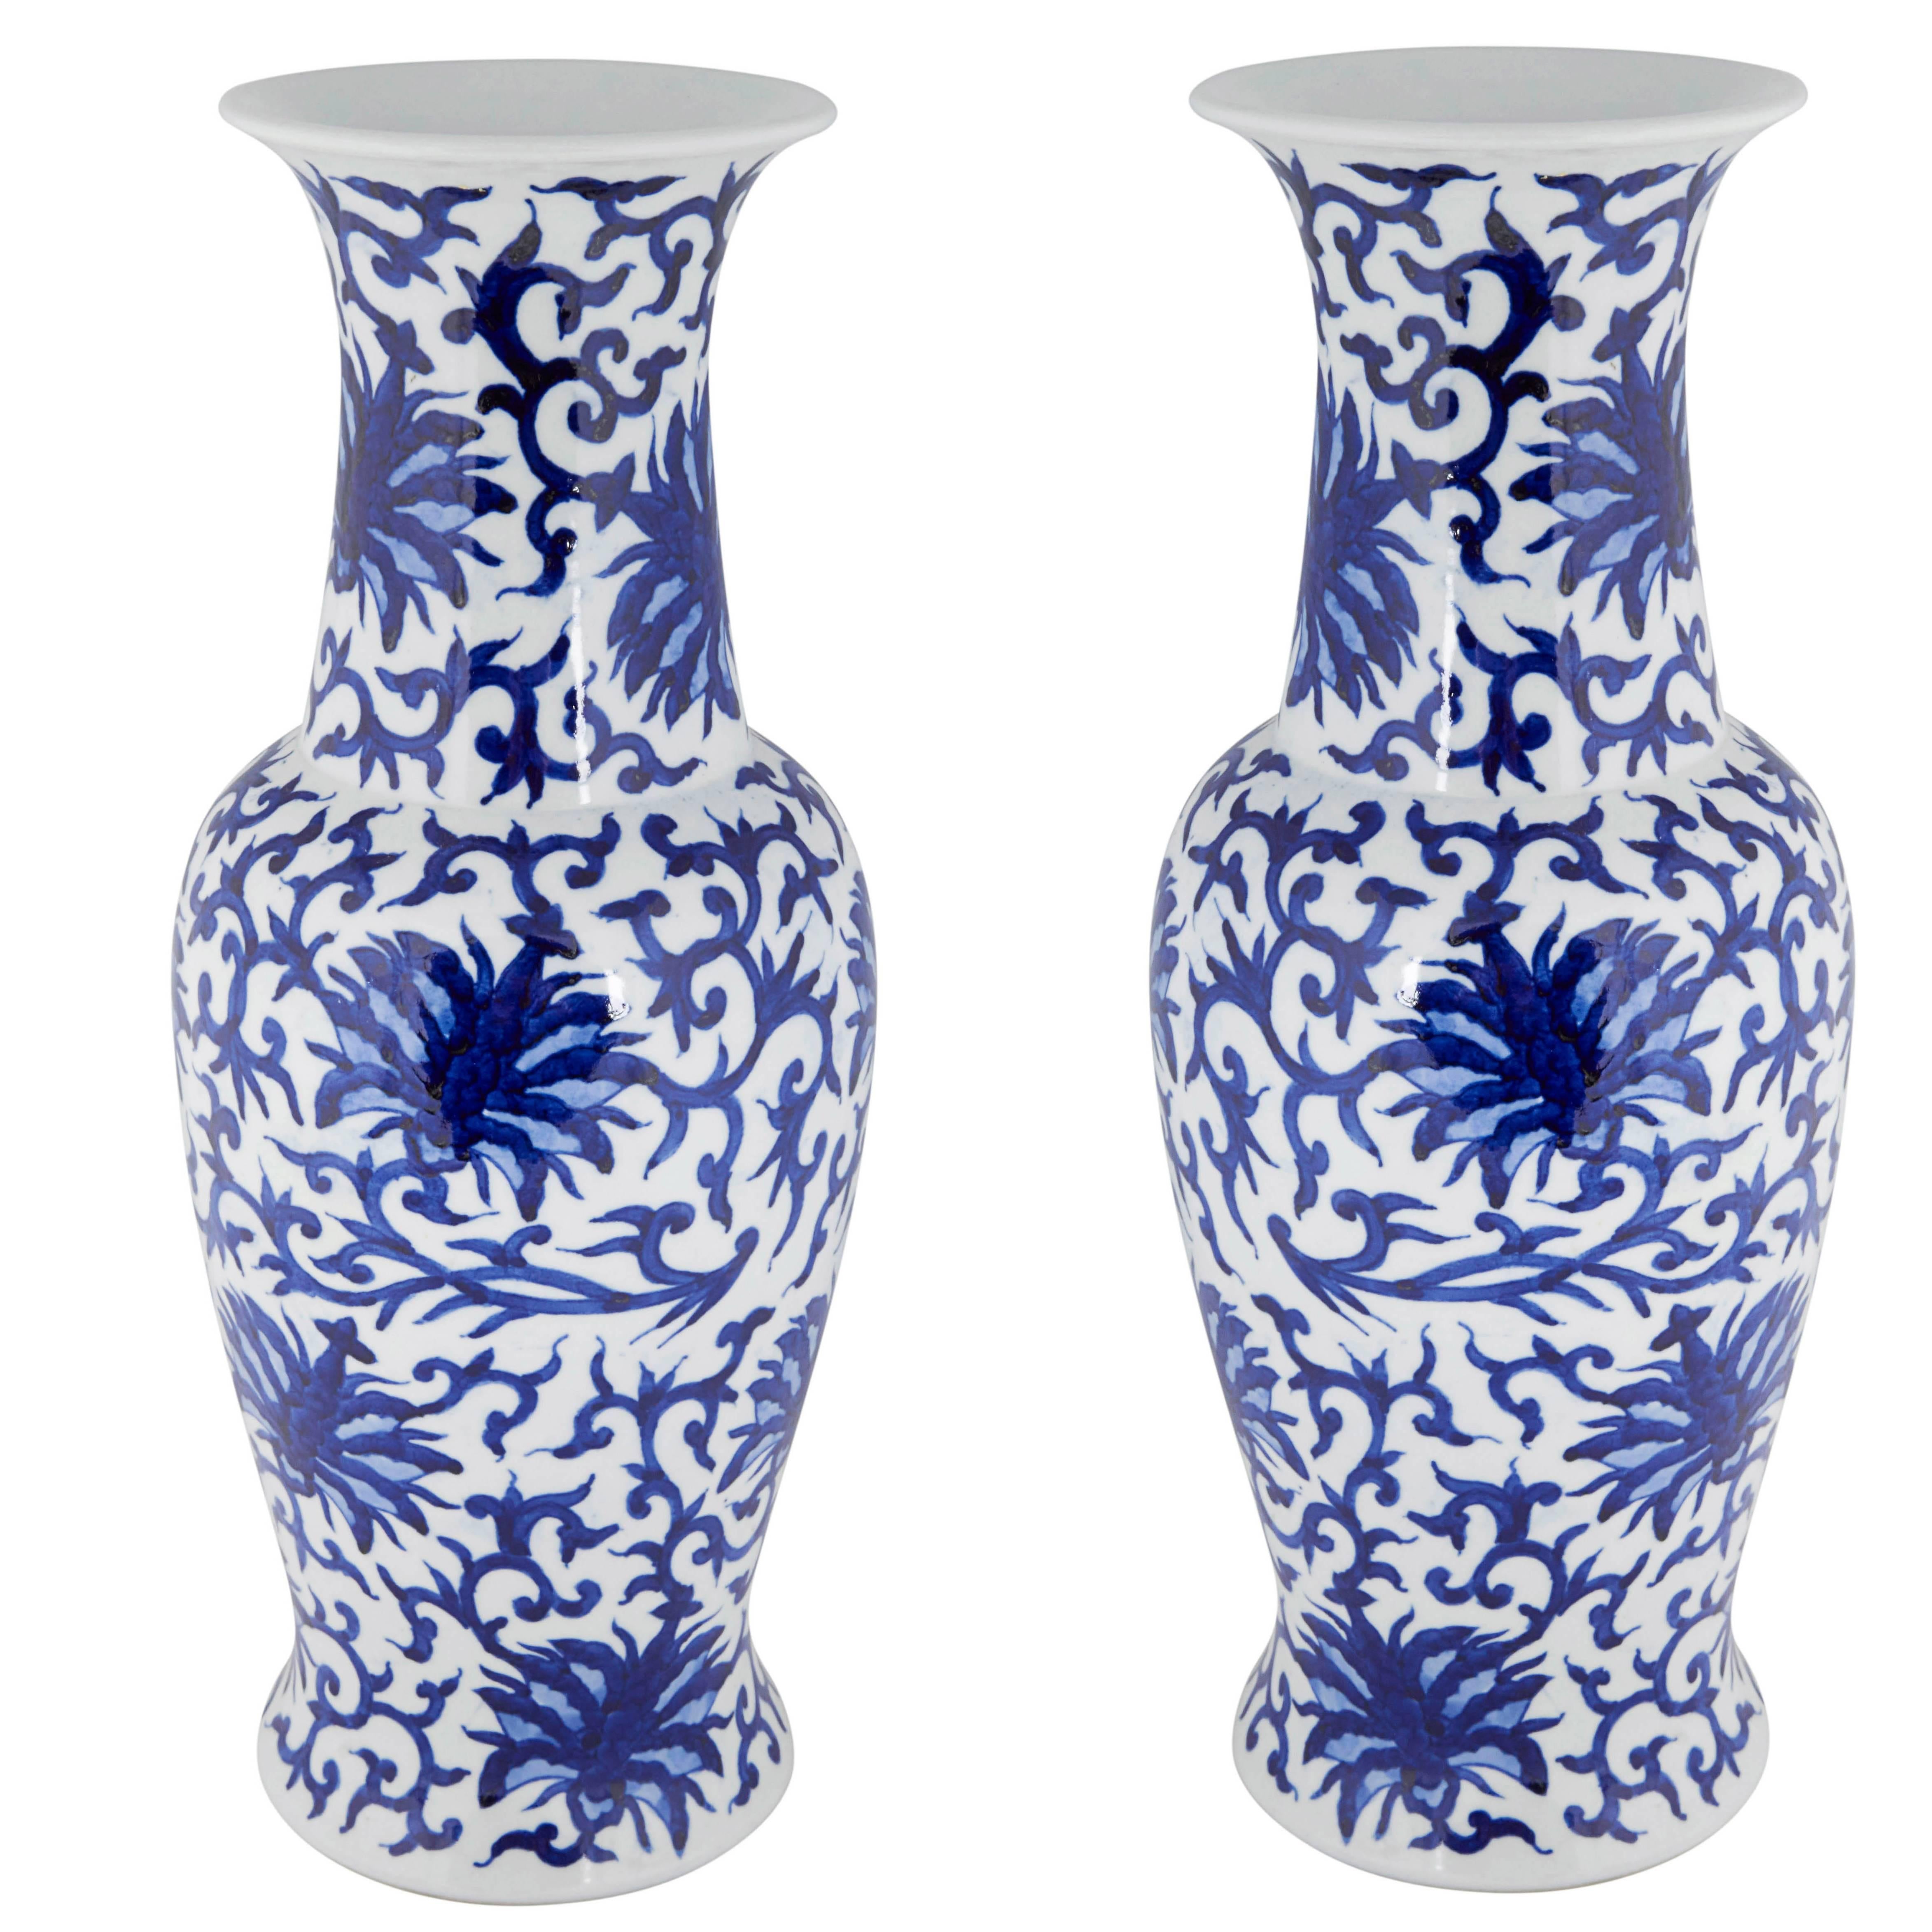 Pair of Chinese White and Blue Ceramic Vases with Floral Motifs